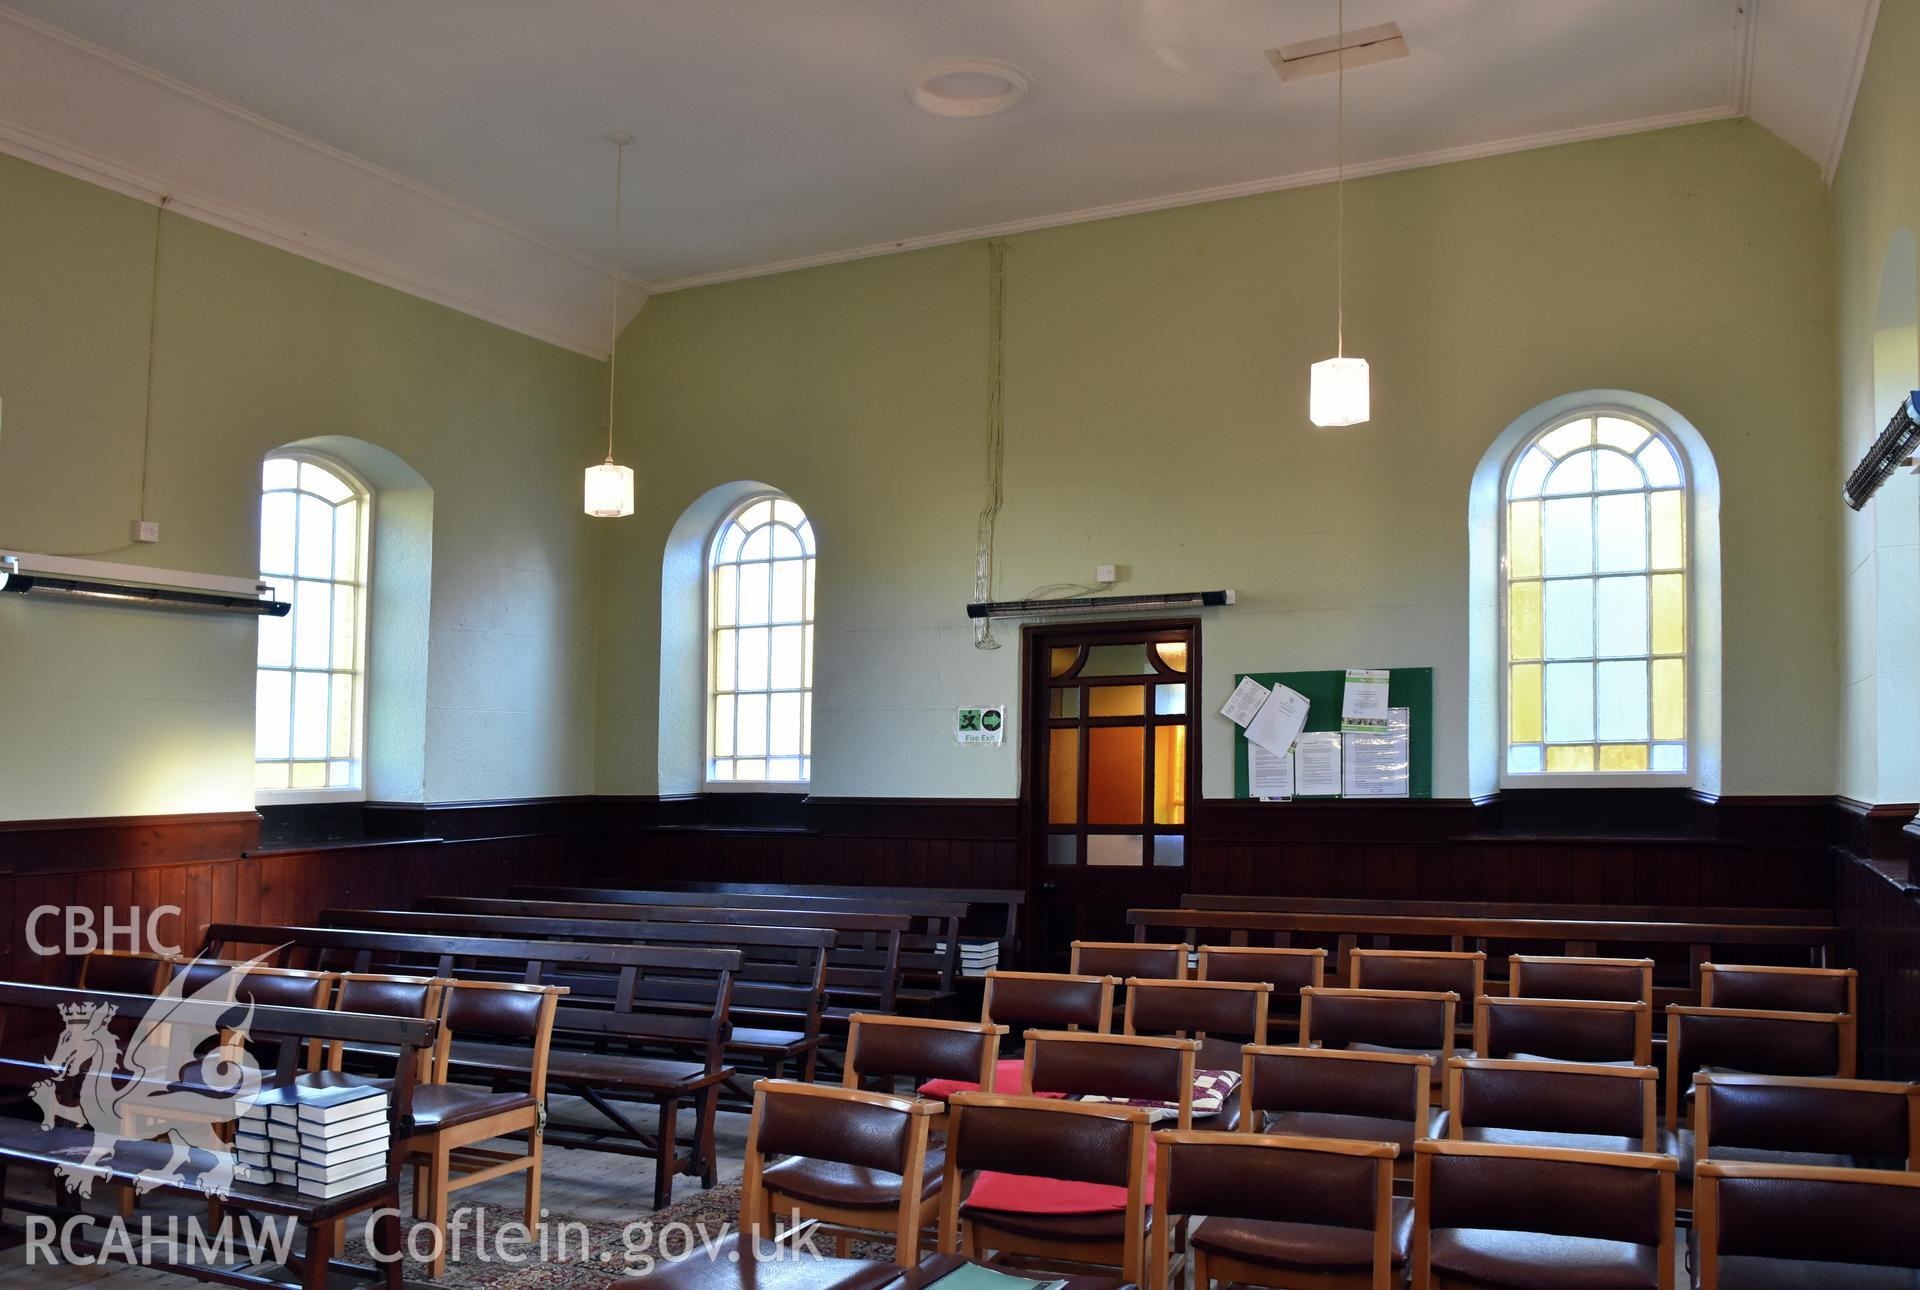 Interior view of Hyssington Primitive Methodist Chapel, Hyssington, Churchstoke, looking towards the rear of the chapel. Photographic survey conducted by Sue Fielding on 7th December 2018.